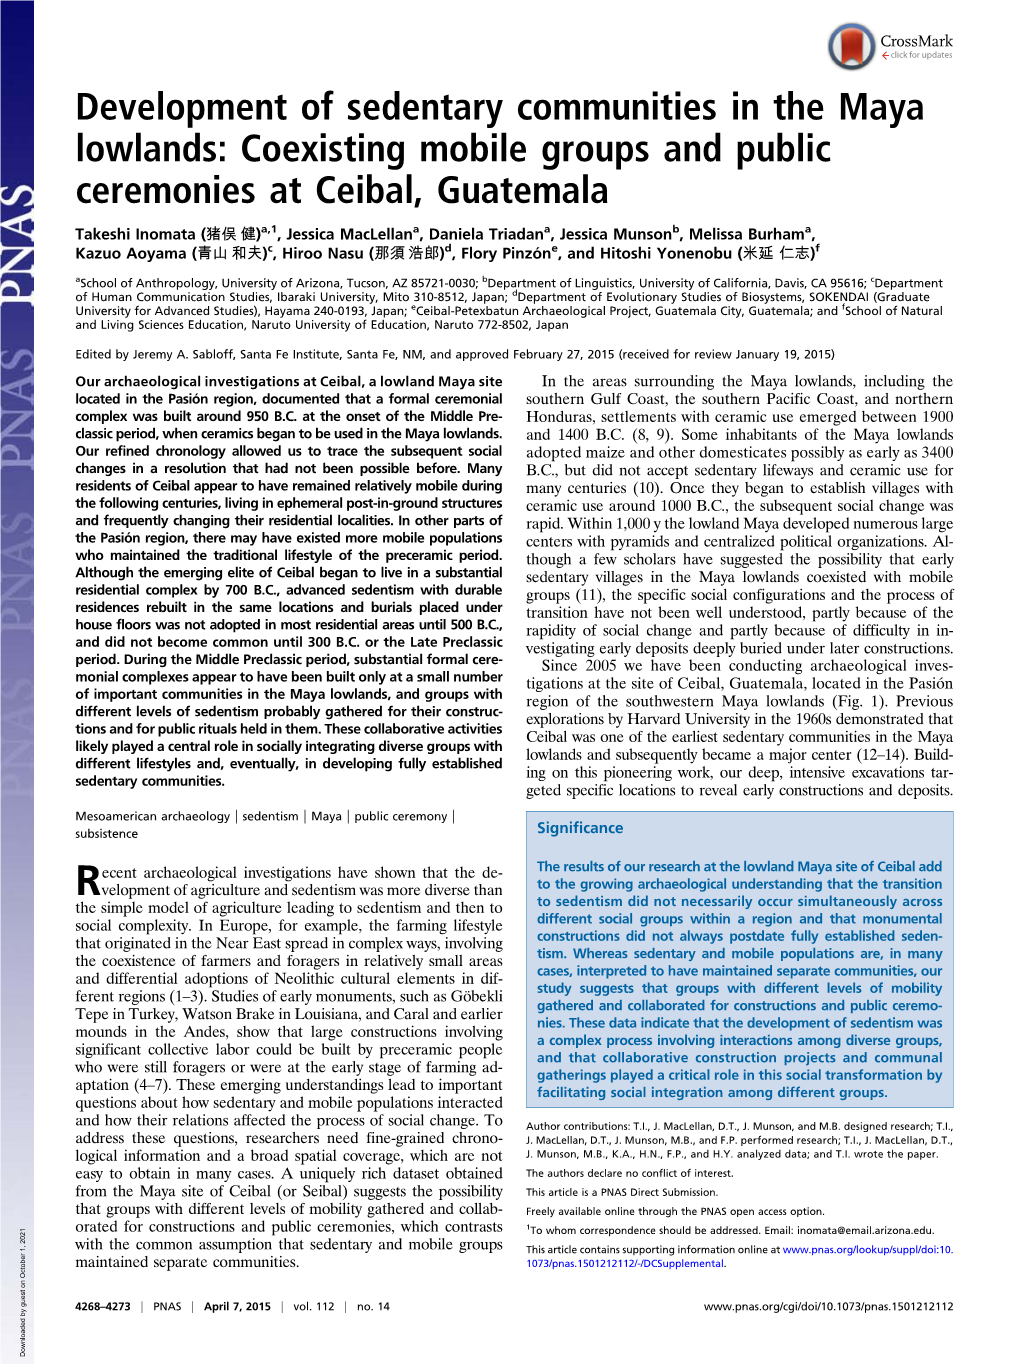 Development of Sedentary Communities in the Maya Lowlands: Coexisting Mobile Groups and Public Ceremonies at Ceibal, Guatemala